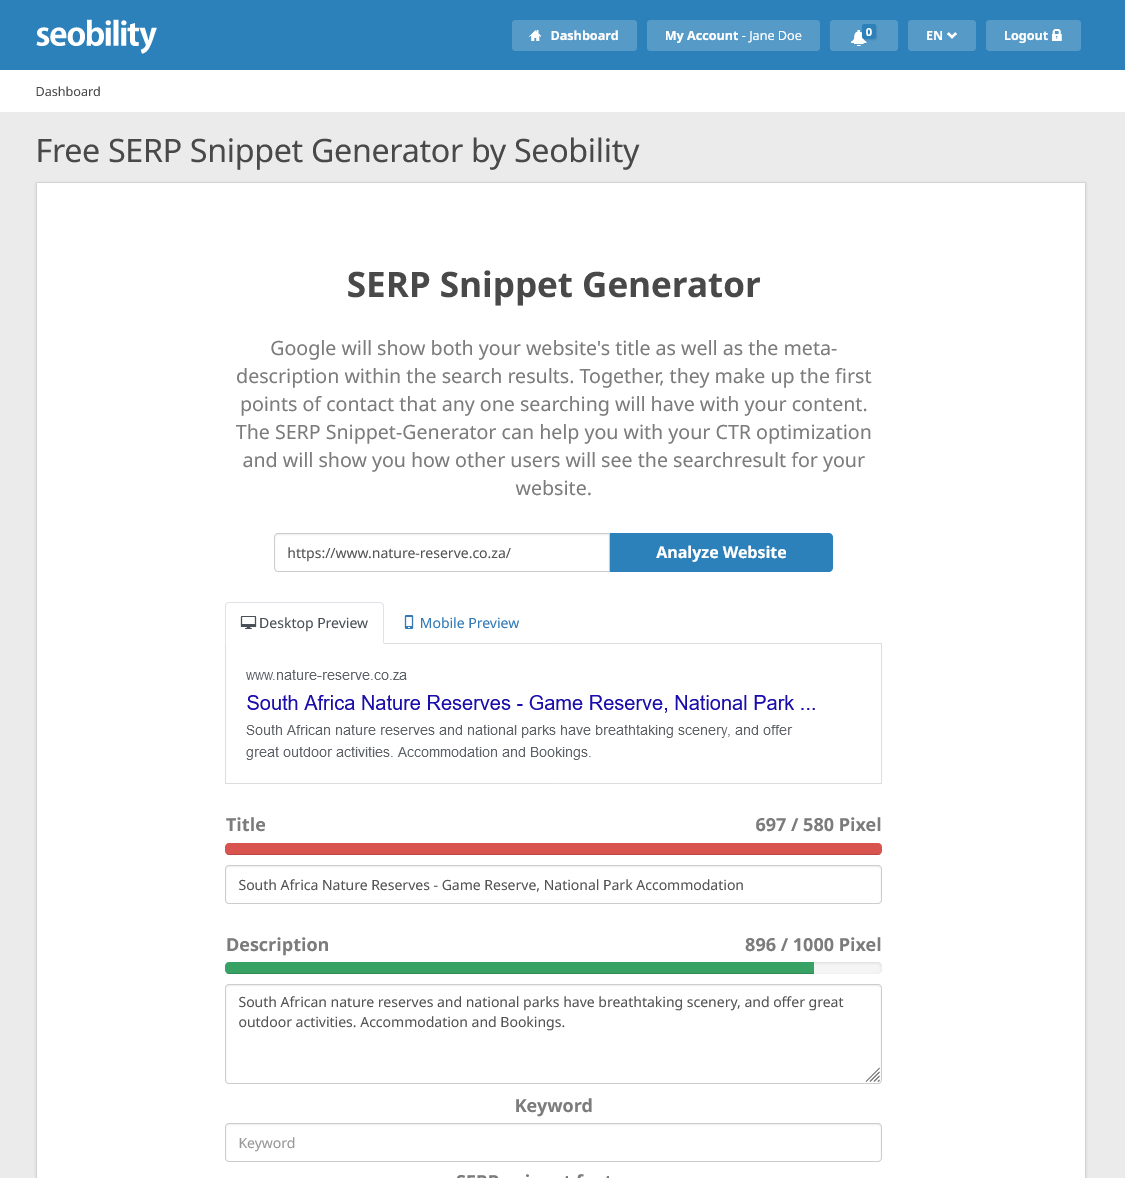 SERP Snippet Generator from Seobility